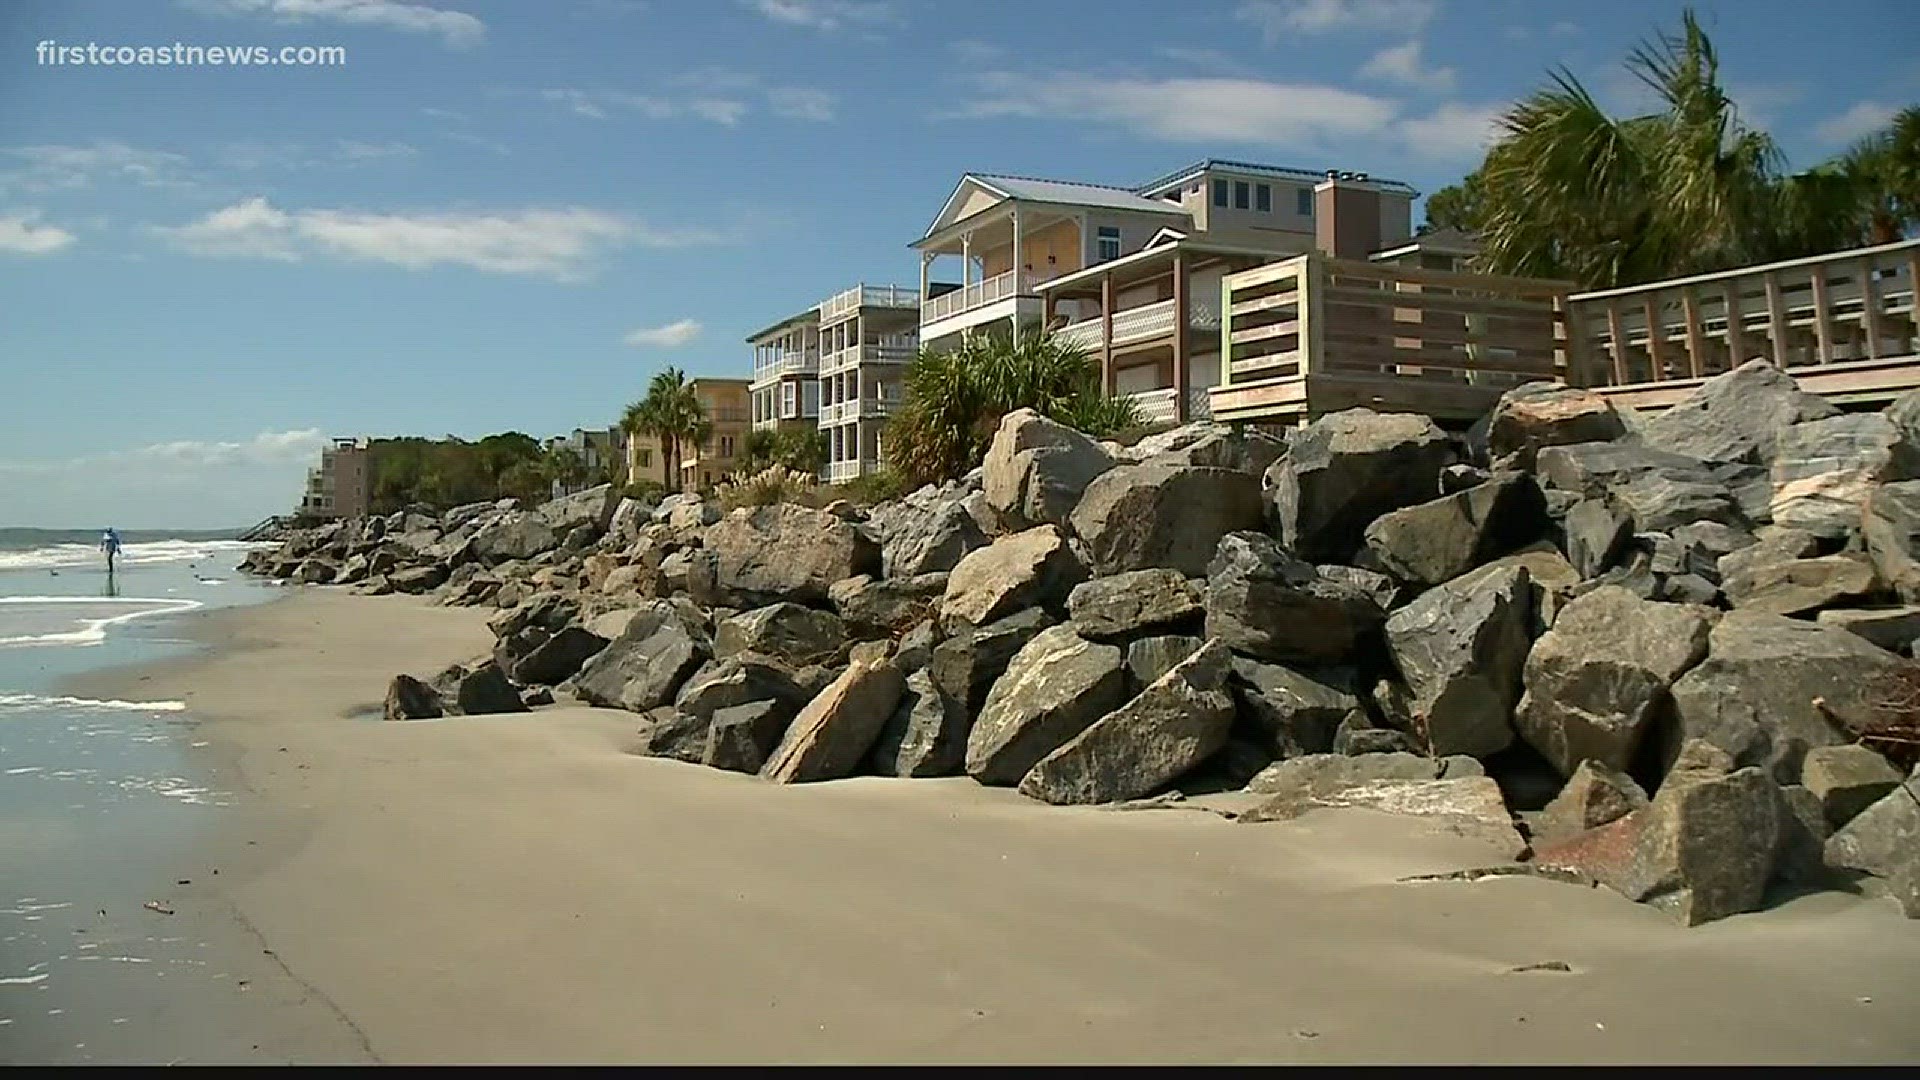 Water samples for Middle Beach at the Jekyll Island Convention Center tested positive for a dangerous bacteria that may cause illness.